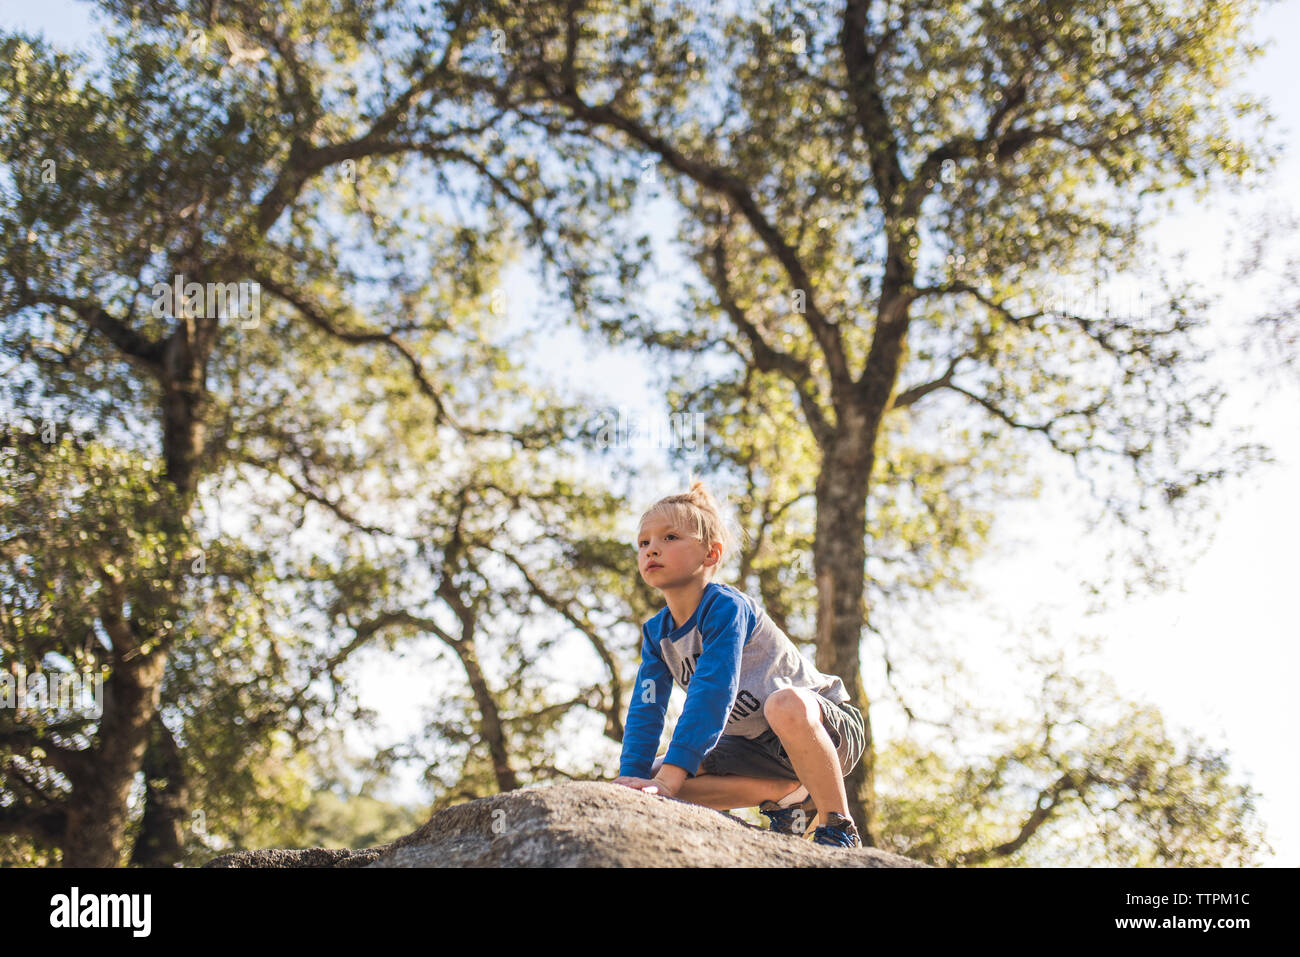 Low angle view of boy looking away while sitting on rock against trees Stock Photo